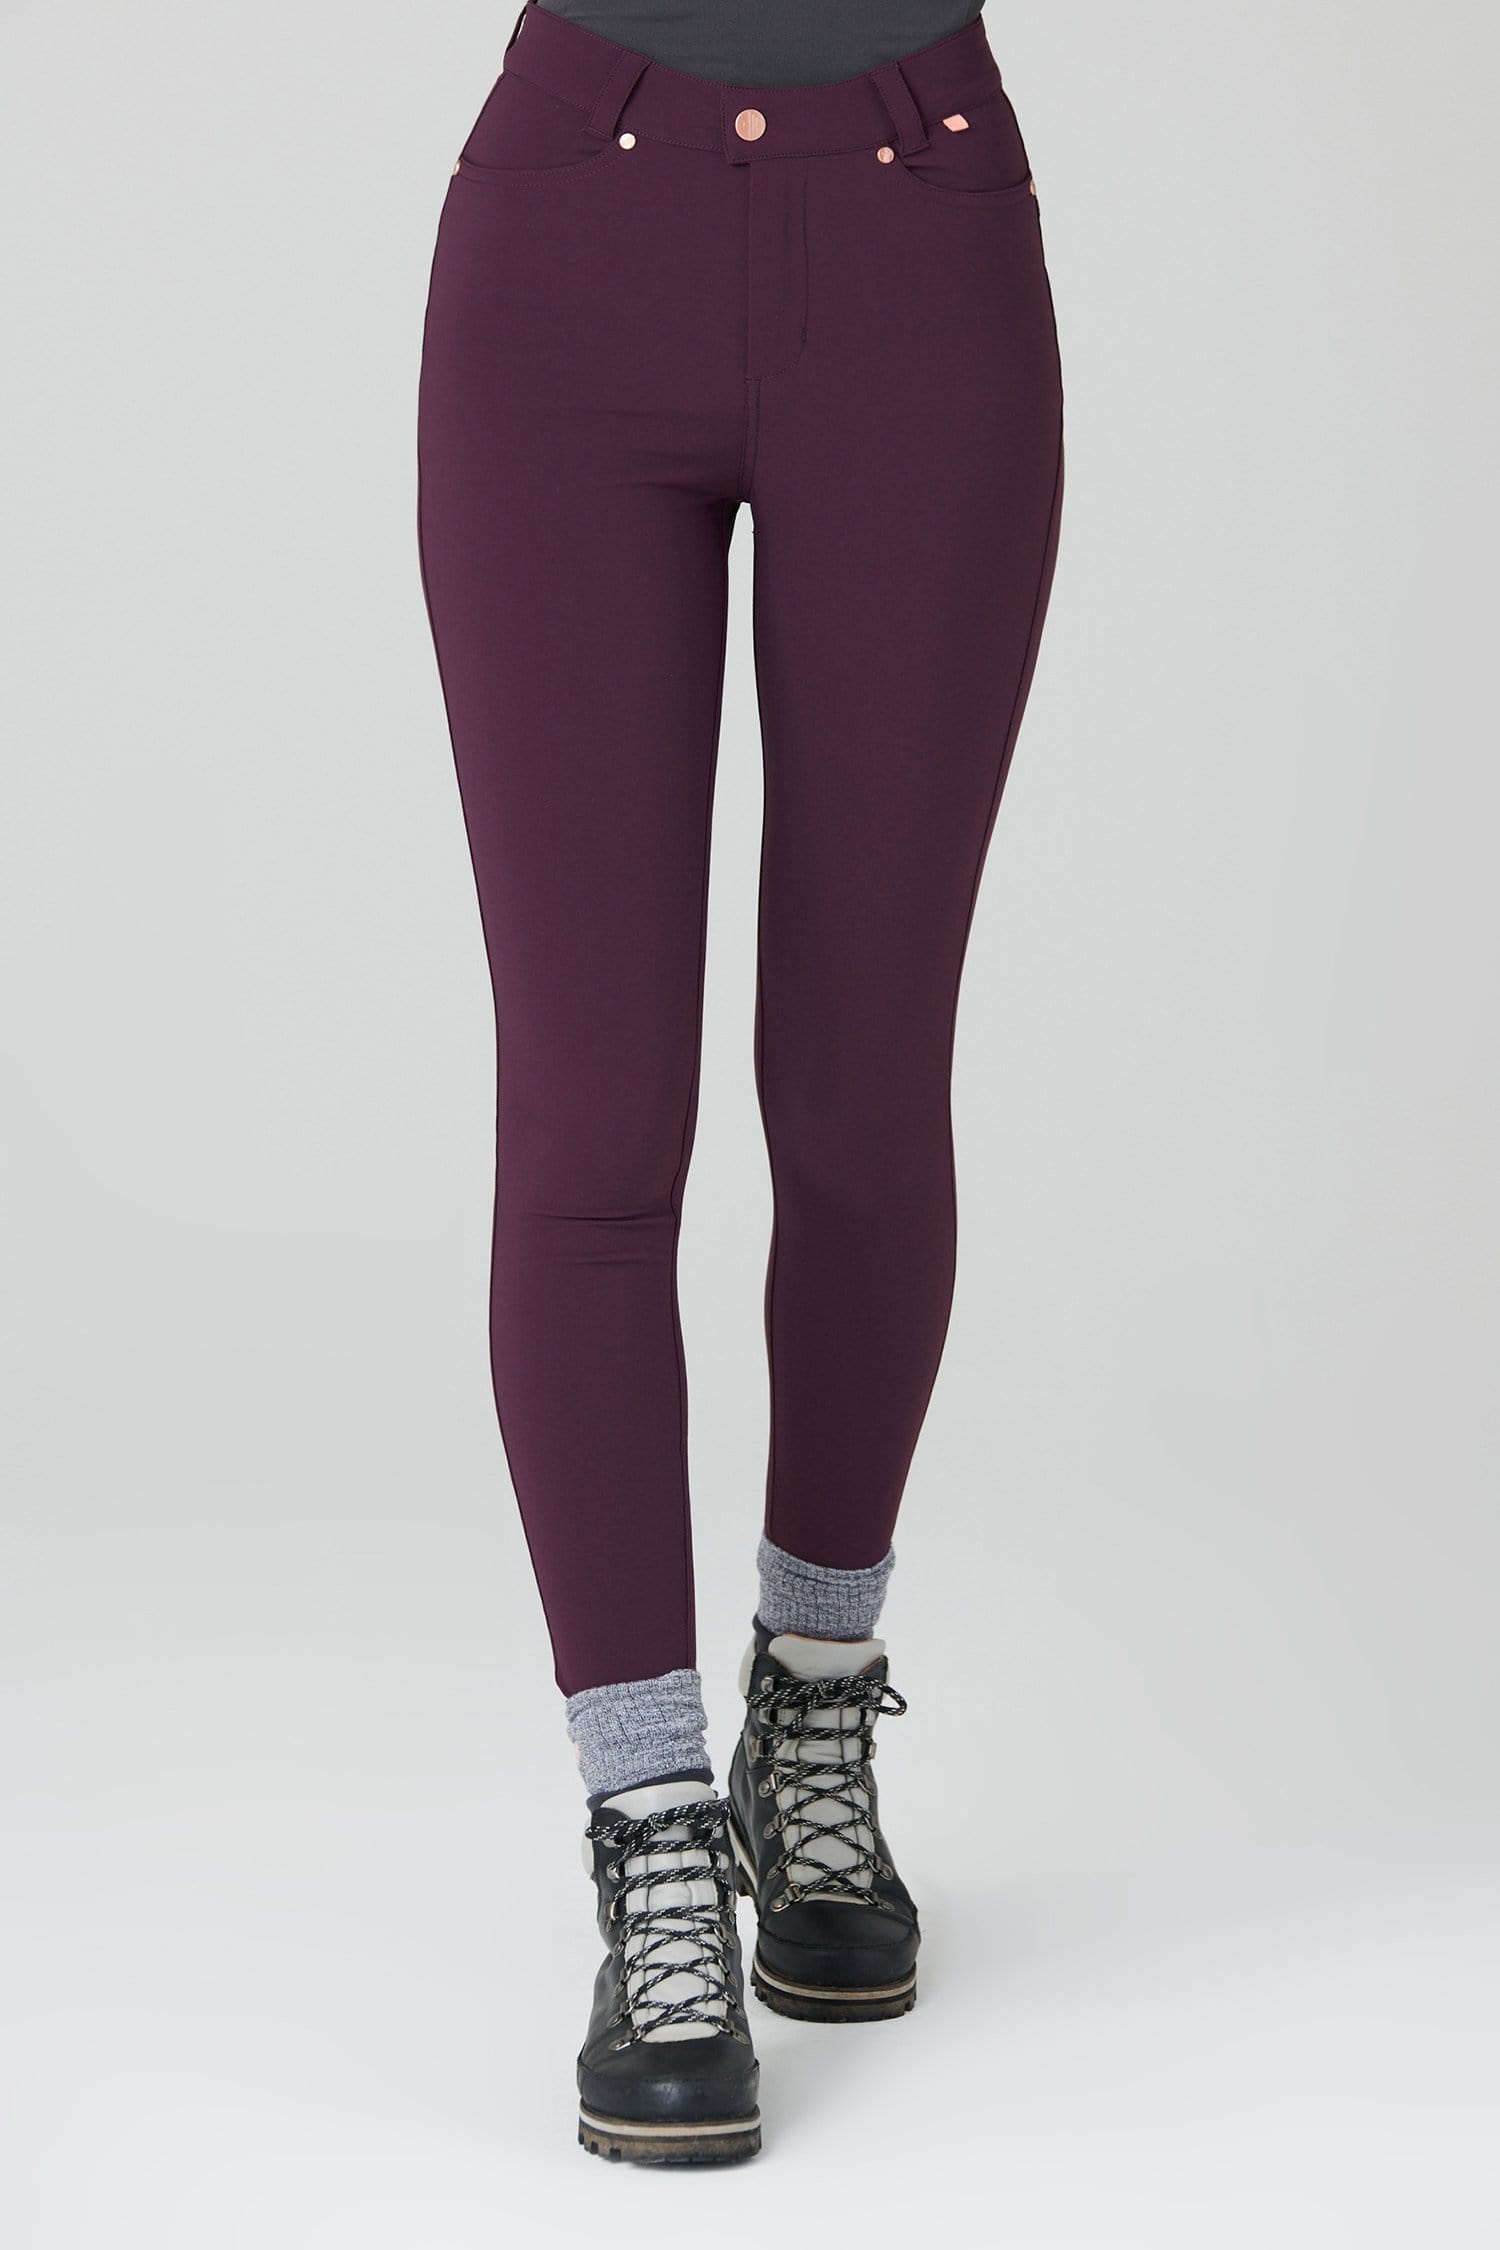 Max Stretch Skinny Outdoor Trousers - Aubergine - 24r / Uk6 - Womens - Acai Outdoorwear